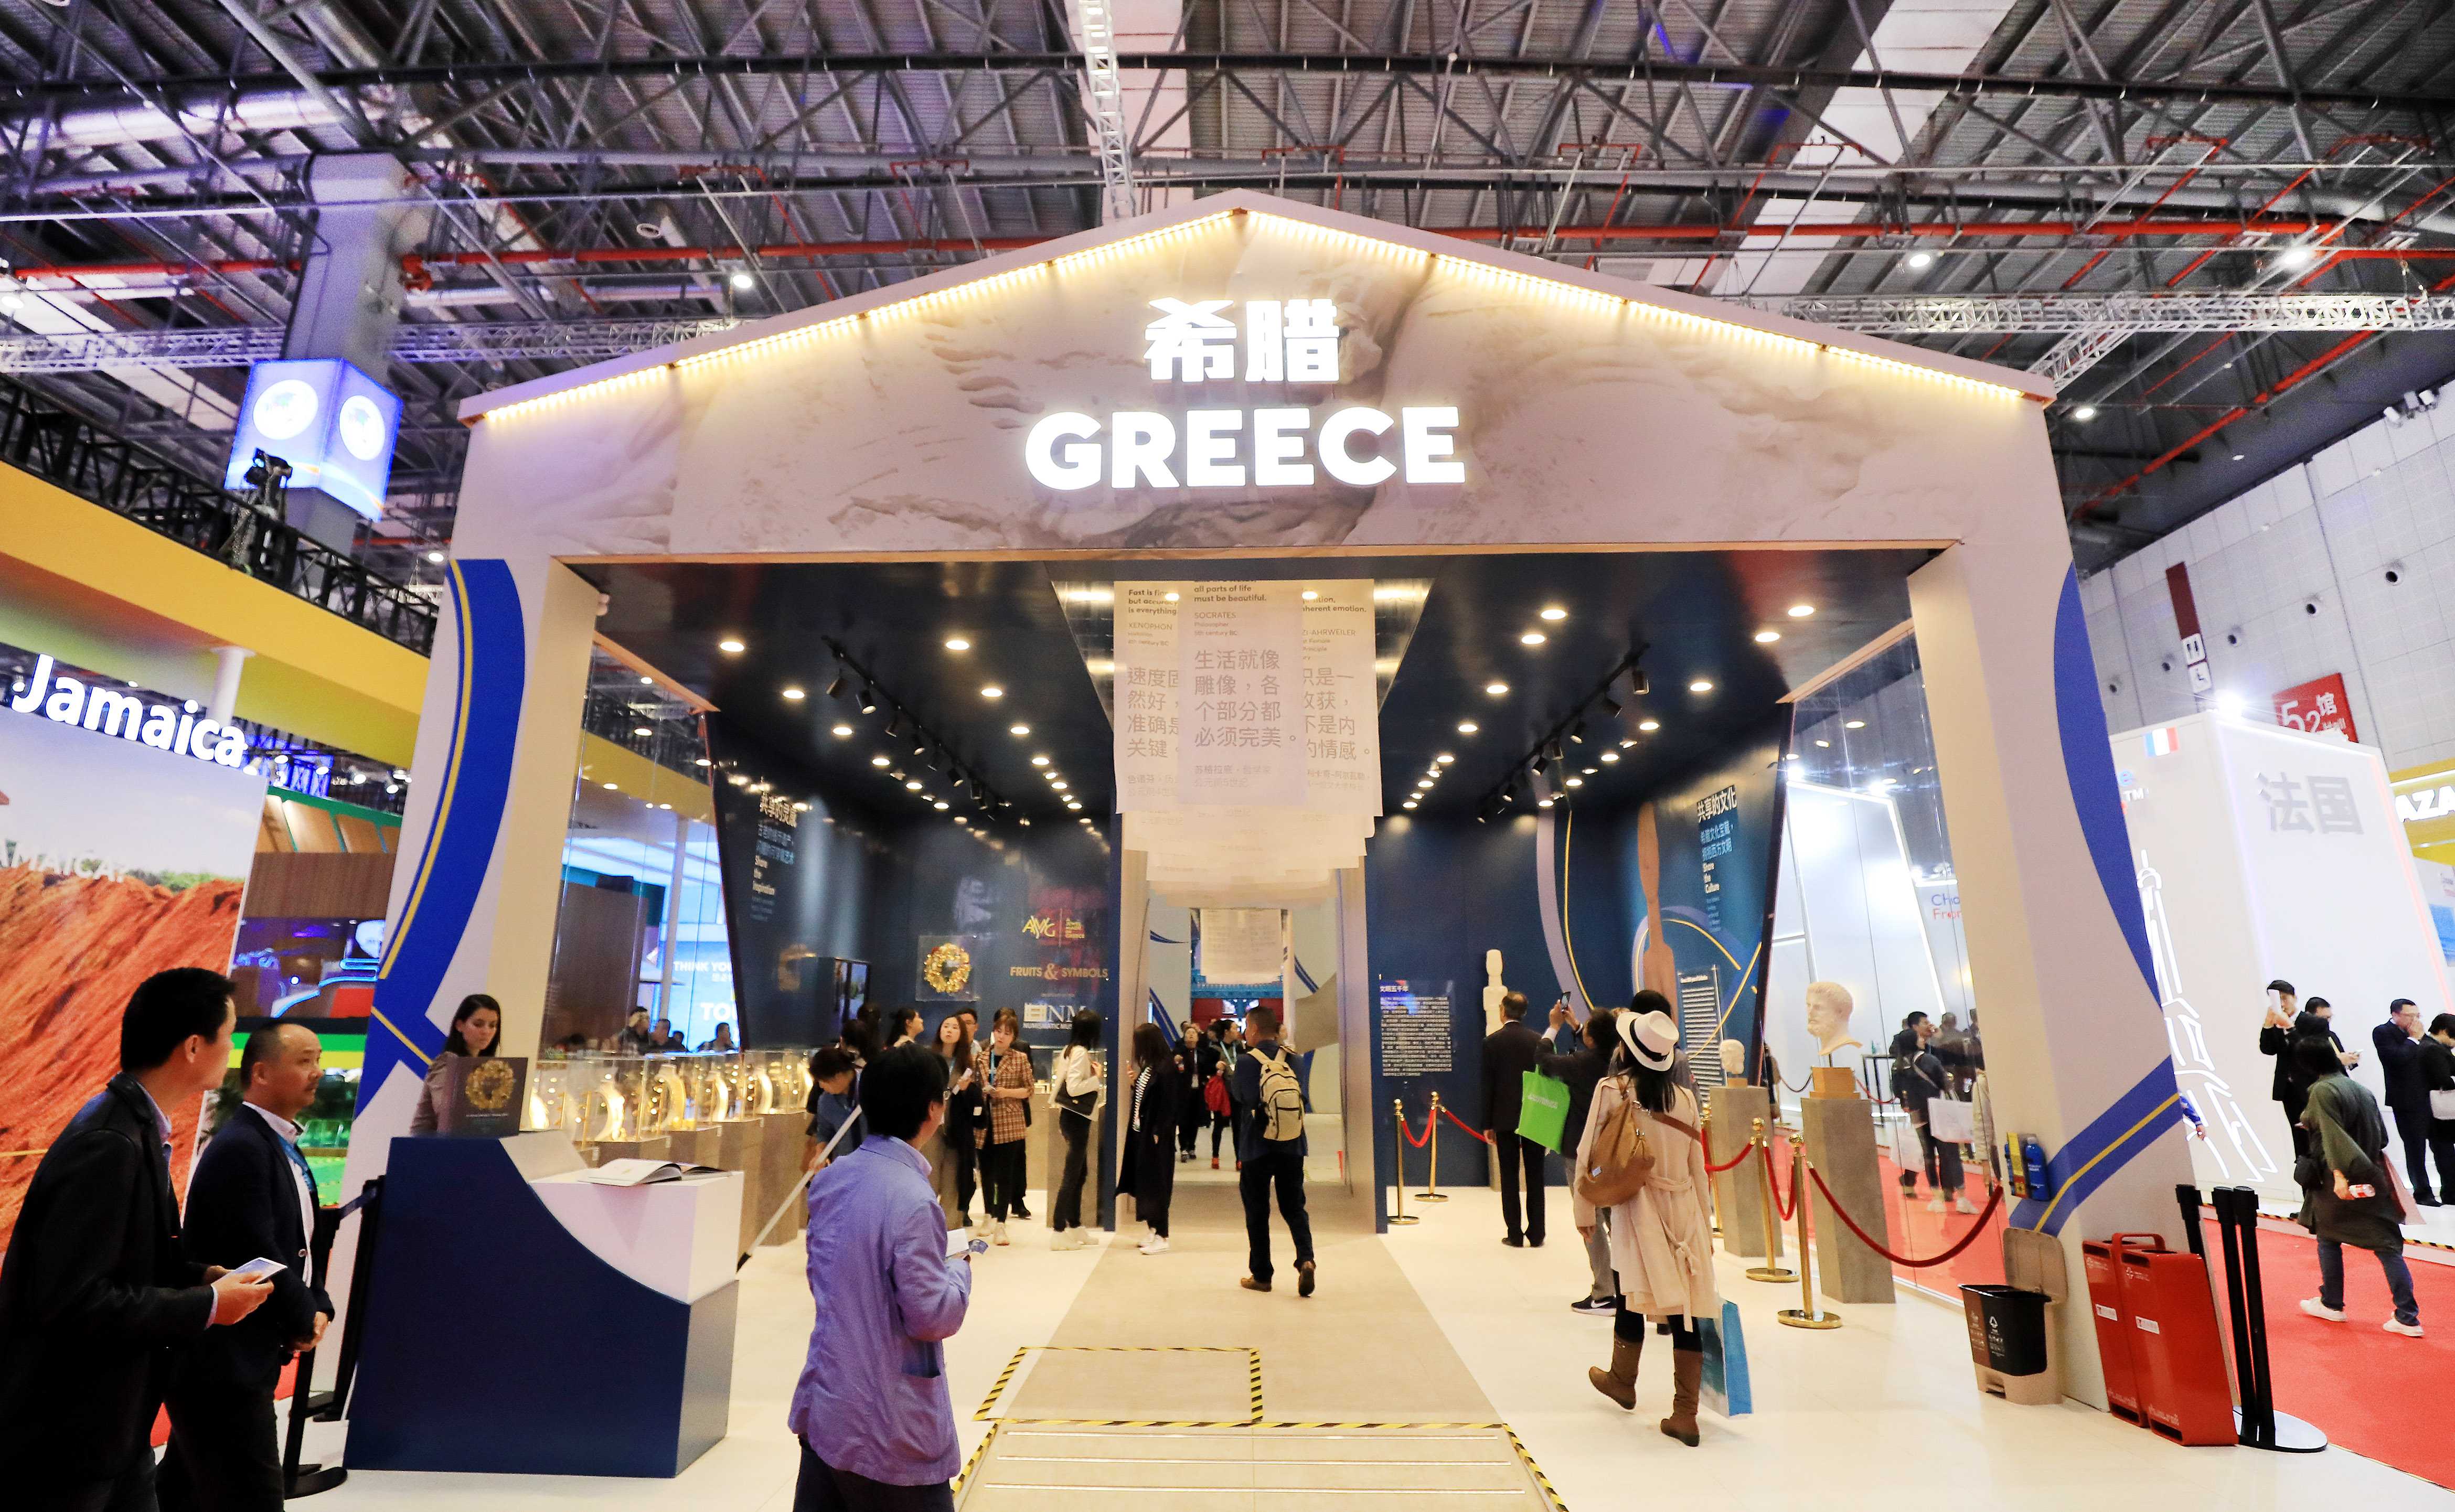 Photo taken on Nov. 8, 2019 shows the Greece pavilion during the second China International Import Expo (CIIE) in Shanghai, east China. Greece is one of the guest countries of honor at the second CIIE. It leads a business delegation of 68 companies representing the most dynamic sectors of the Greek economy here. (Xinhua/Fang Zhe)